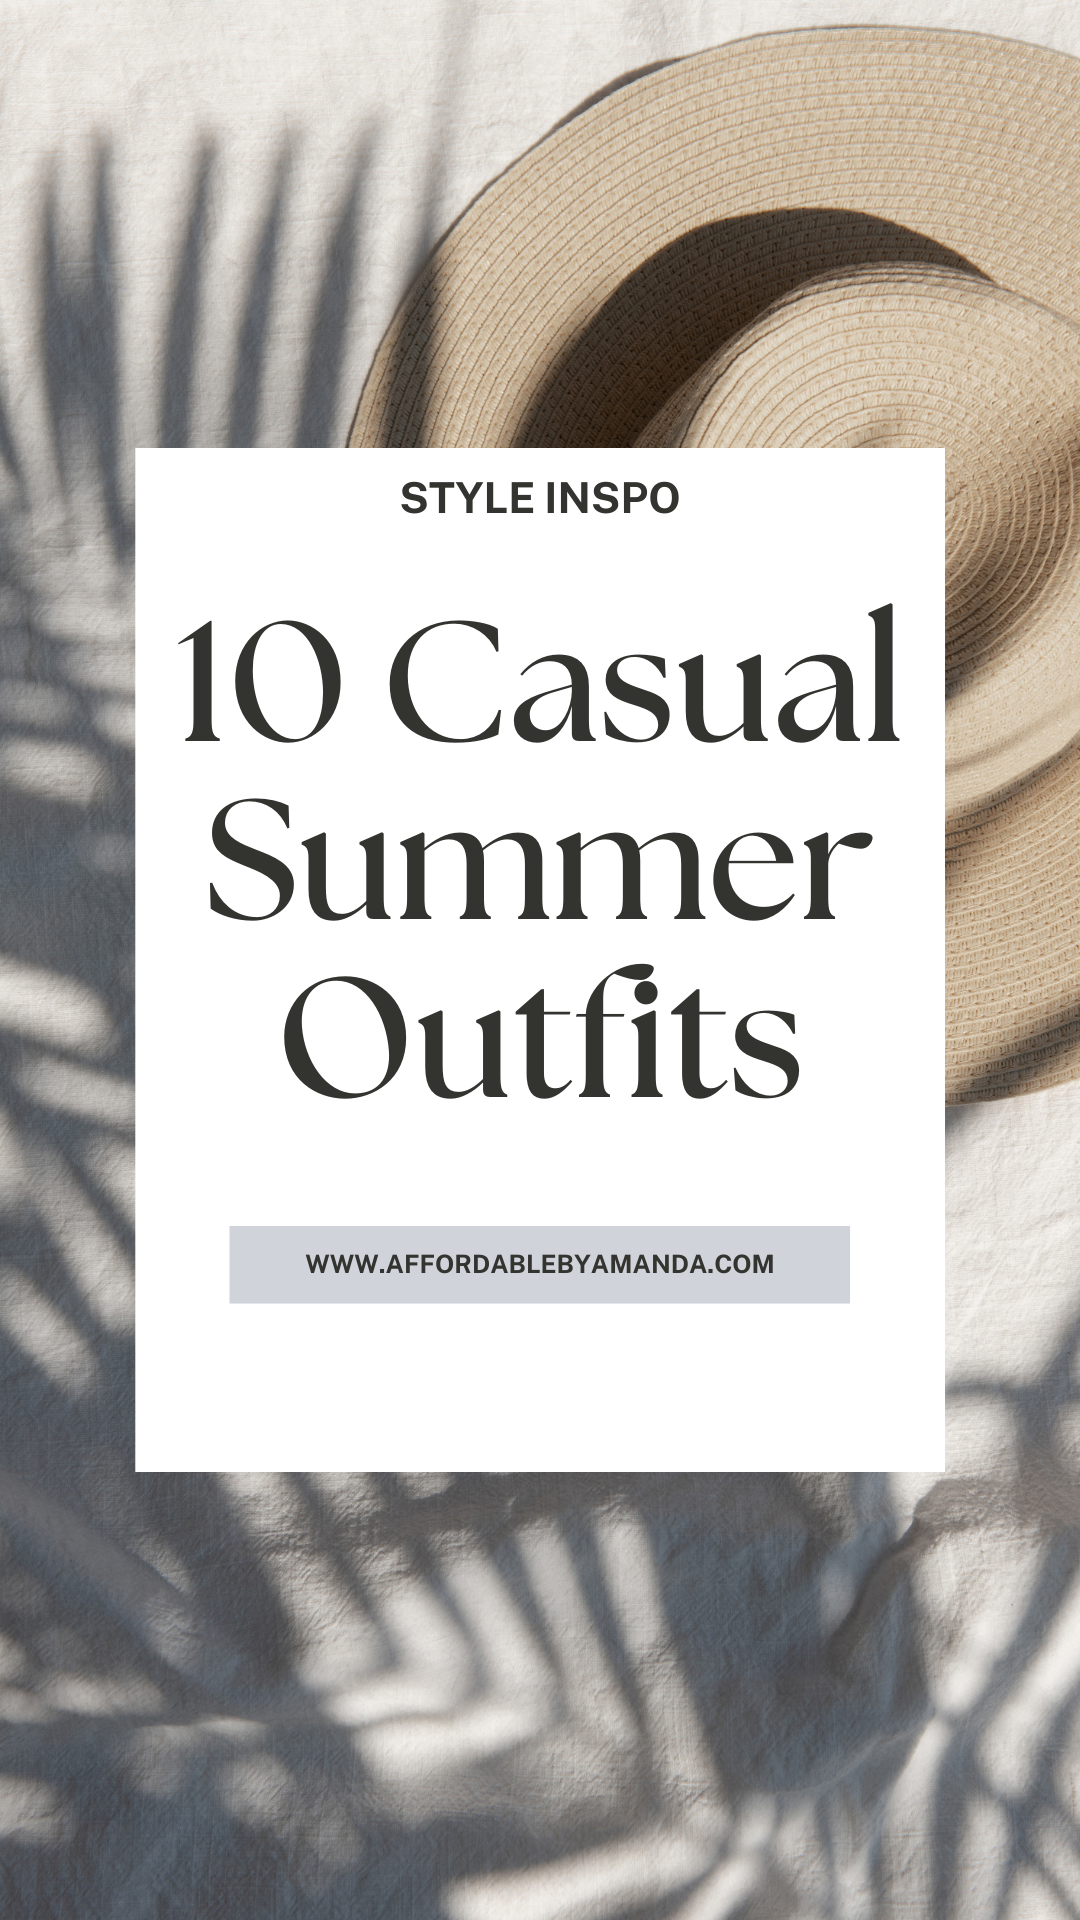 10 Casual Summer Outfits - Affordable by Amanda - Casual Summer Outfits for Women - Amazon Summer Outfits for Women - Classy Summer Outfits for Ladies - Cute and Casual Summer Outfits